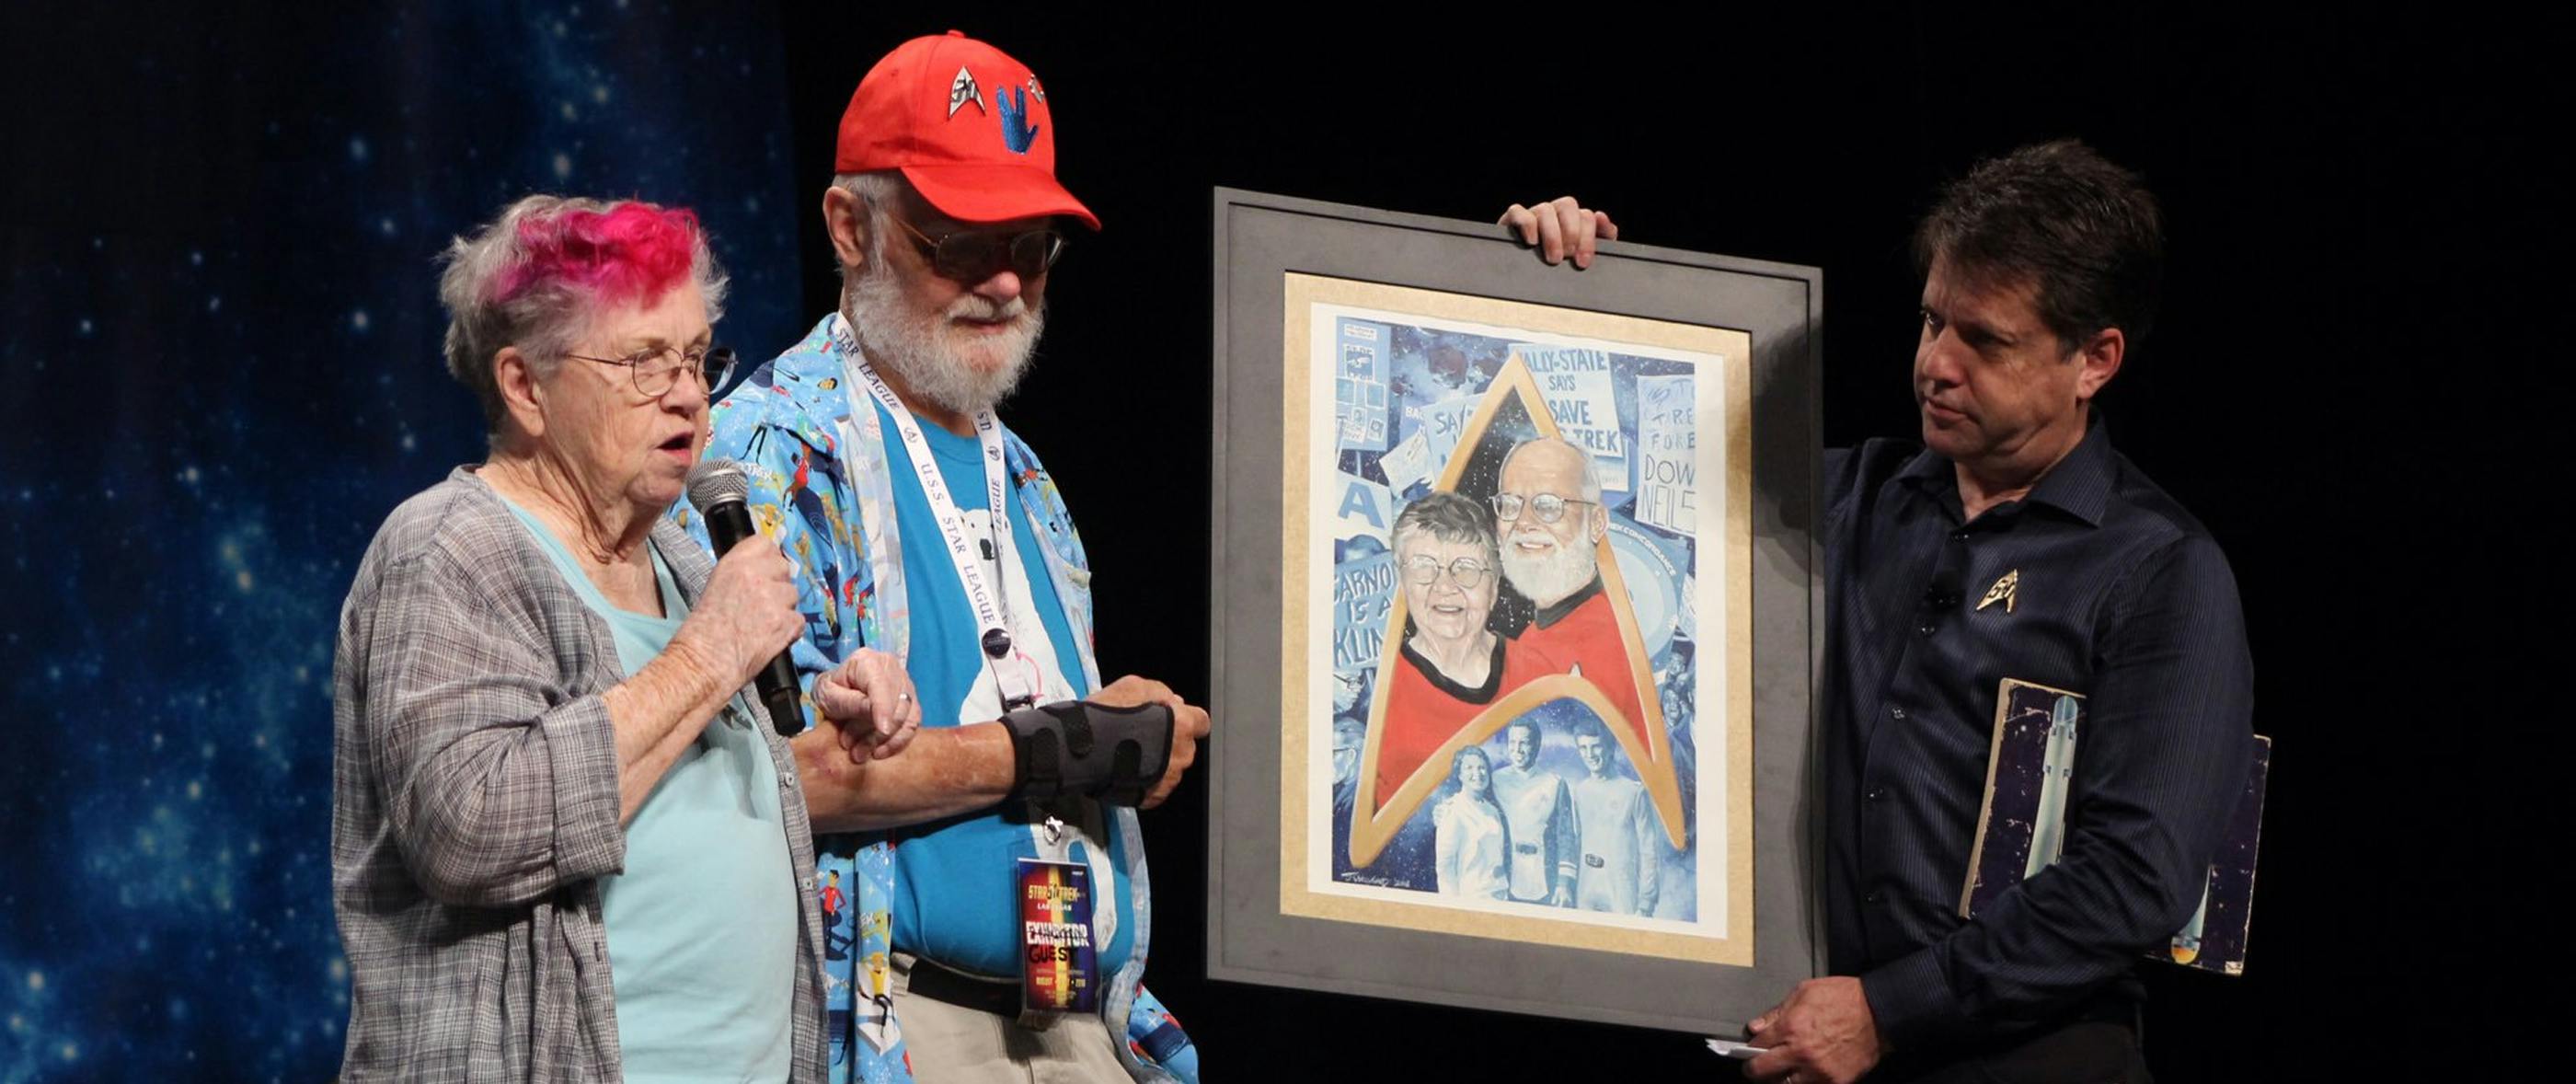 For the 50th anniversary celebration at Star Trek Last Vegas, John Van Citters invites Bjo and John Trimble to recognize their efforts and present them with a painted portrait from artist JK Woodward